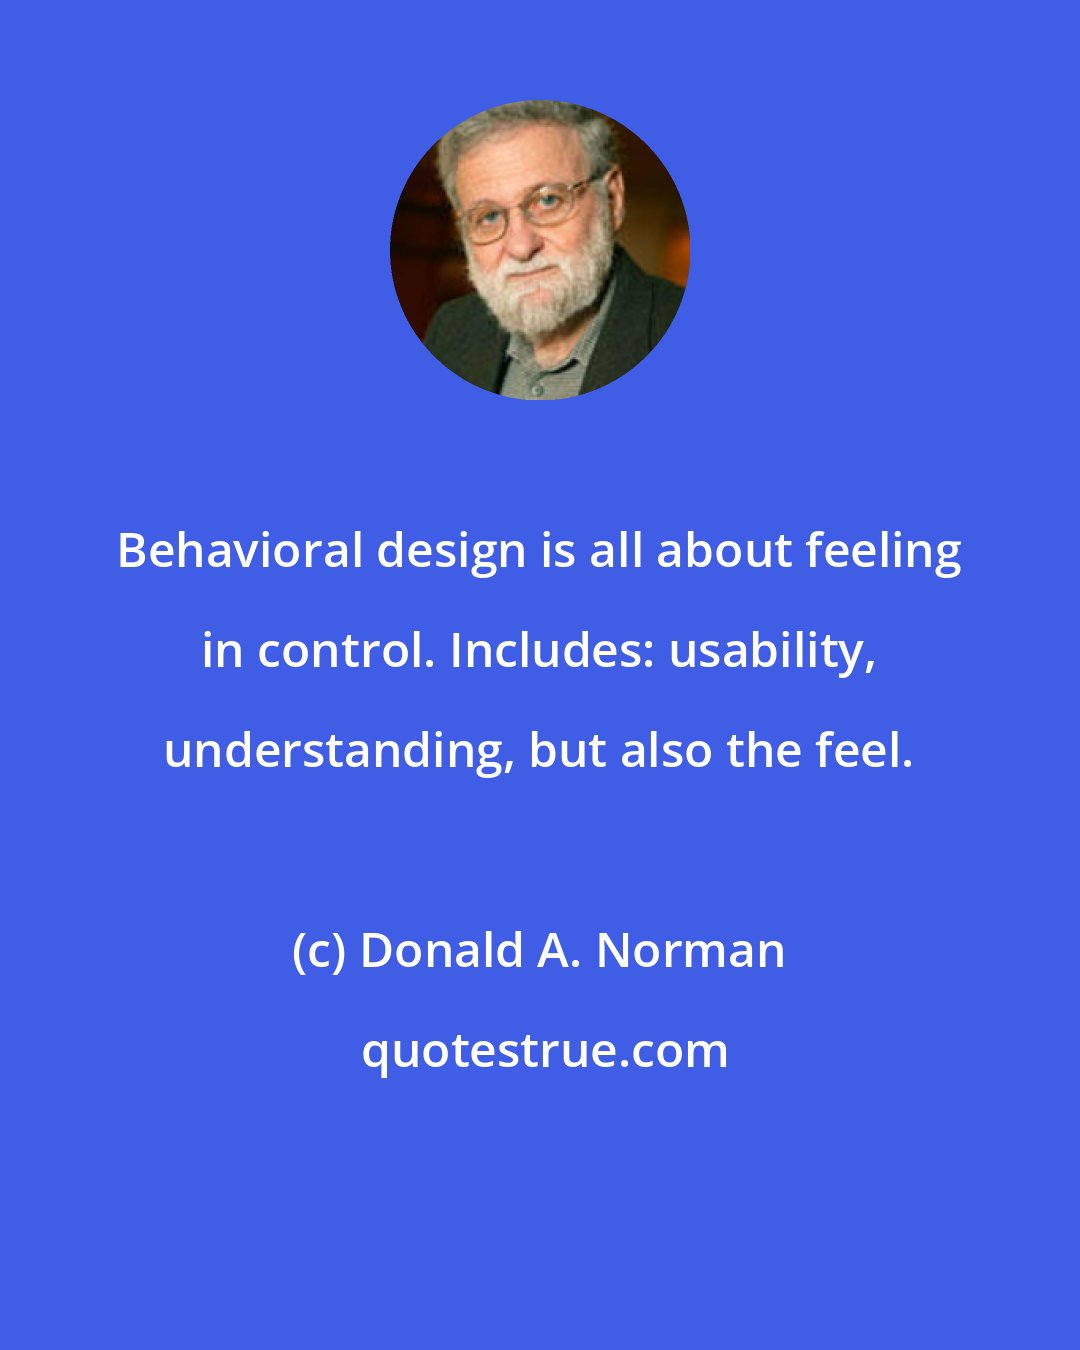 Donald A. Norman: Behavioral design is all about feeling in control. Includes: usability, understanding, but also the feel.